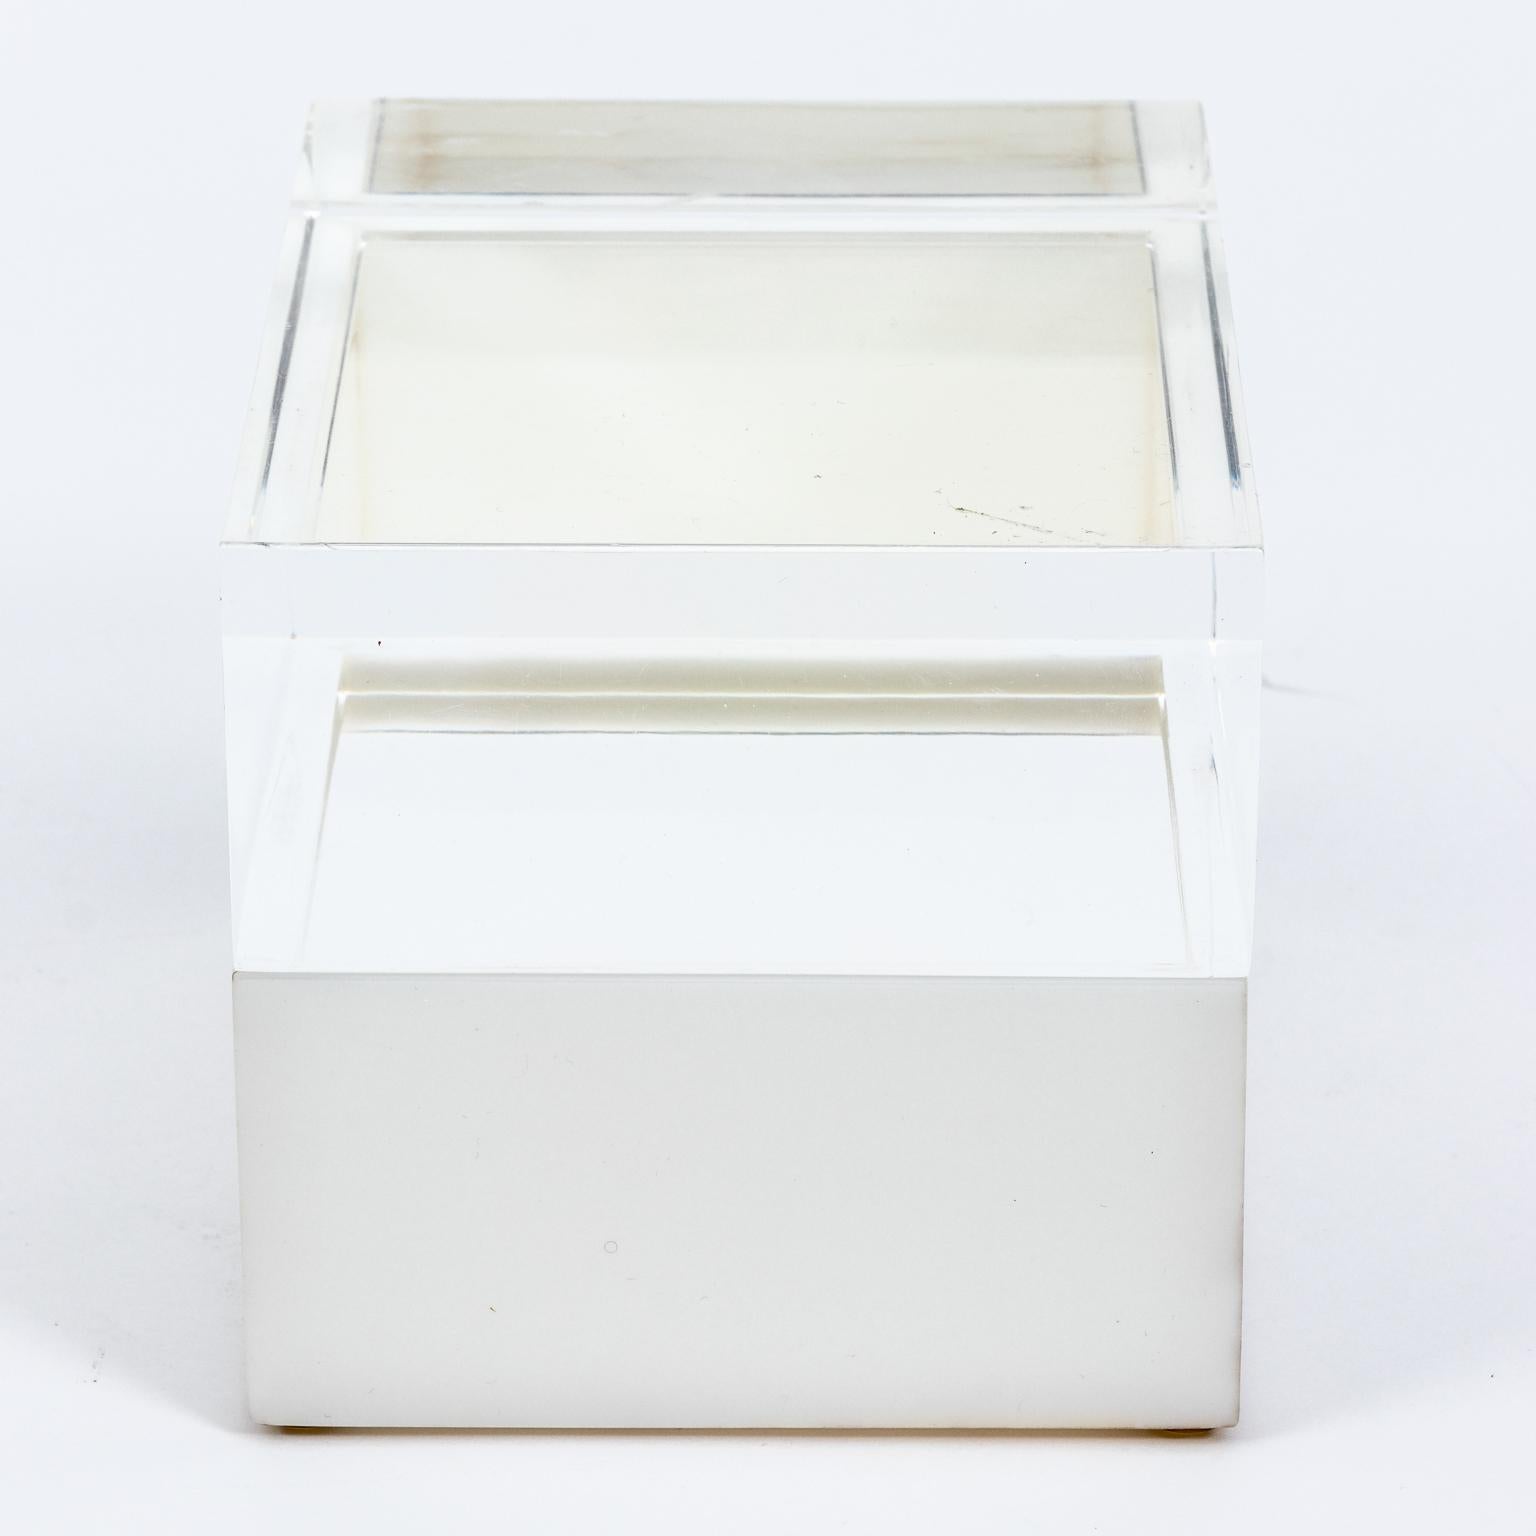 Circa 1970s square Alessandro Albrizzi mid-century signed Lucite box that is clear on top and white on bottom in two part box. Made in Italy. Please note of wear consistent with age including some minor scratches.